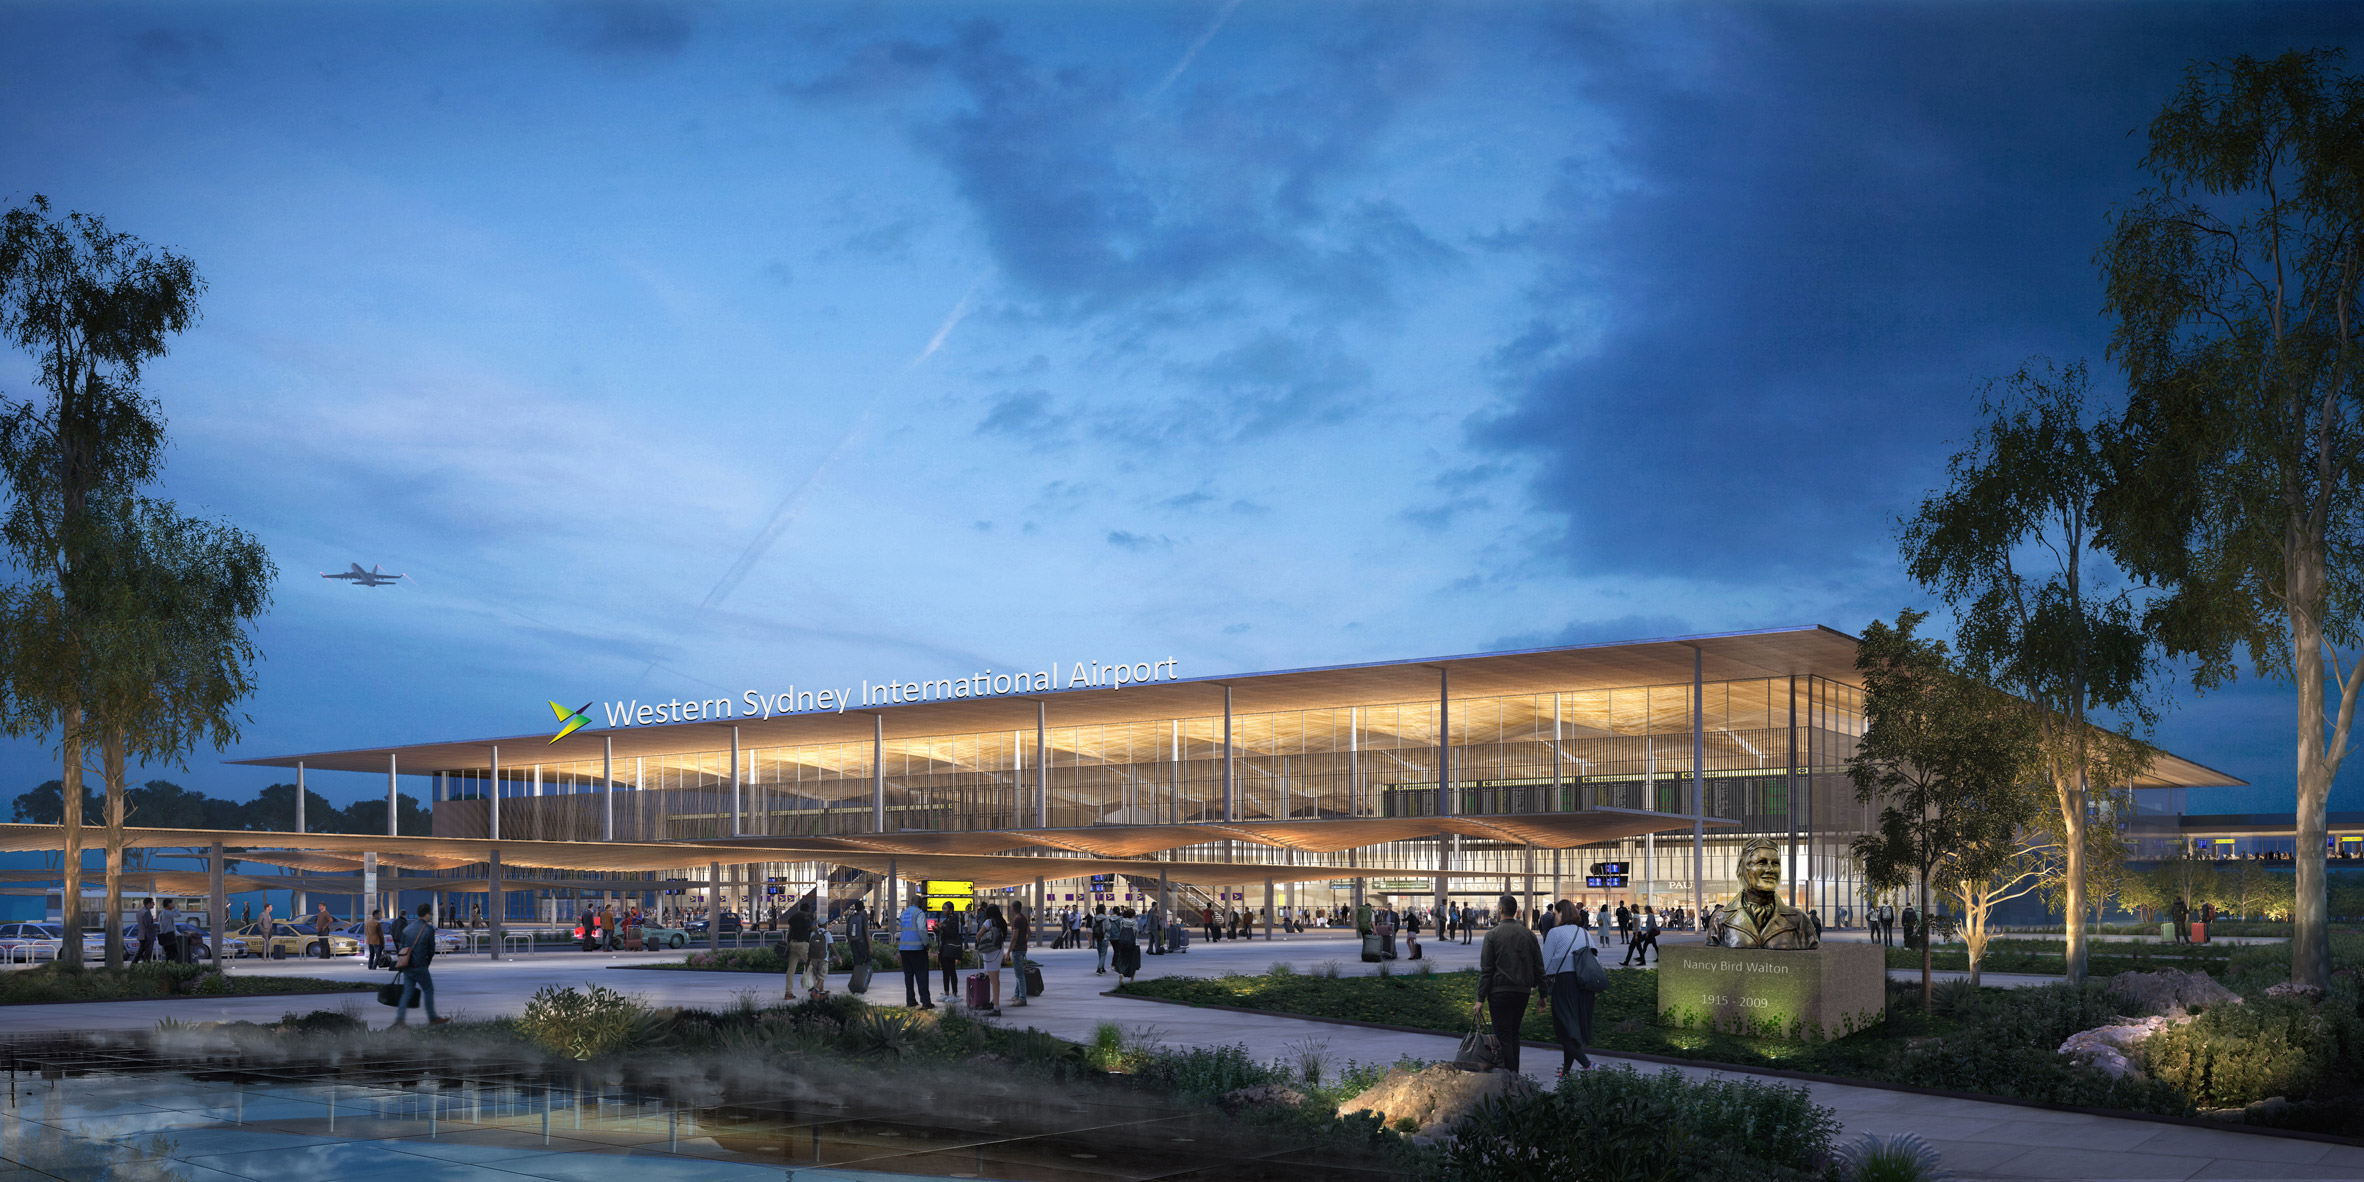 Visuals of Western Sydney International Airport by Zaha Hadid Architects and Cox Architecture in Australia